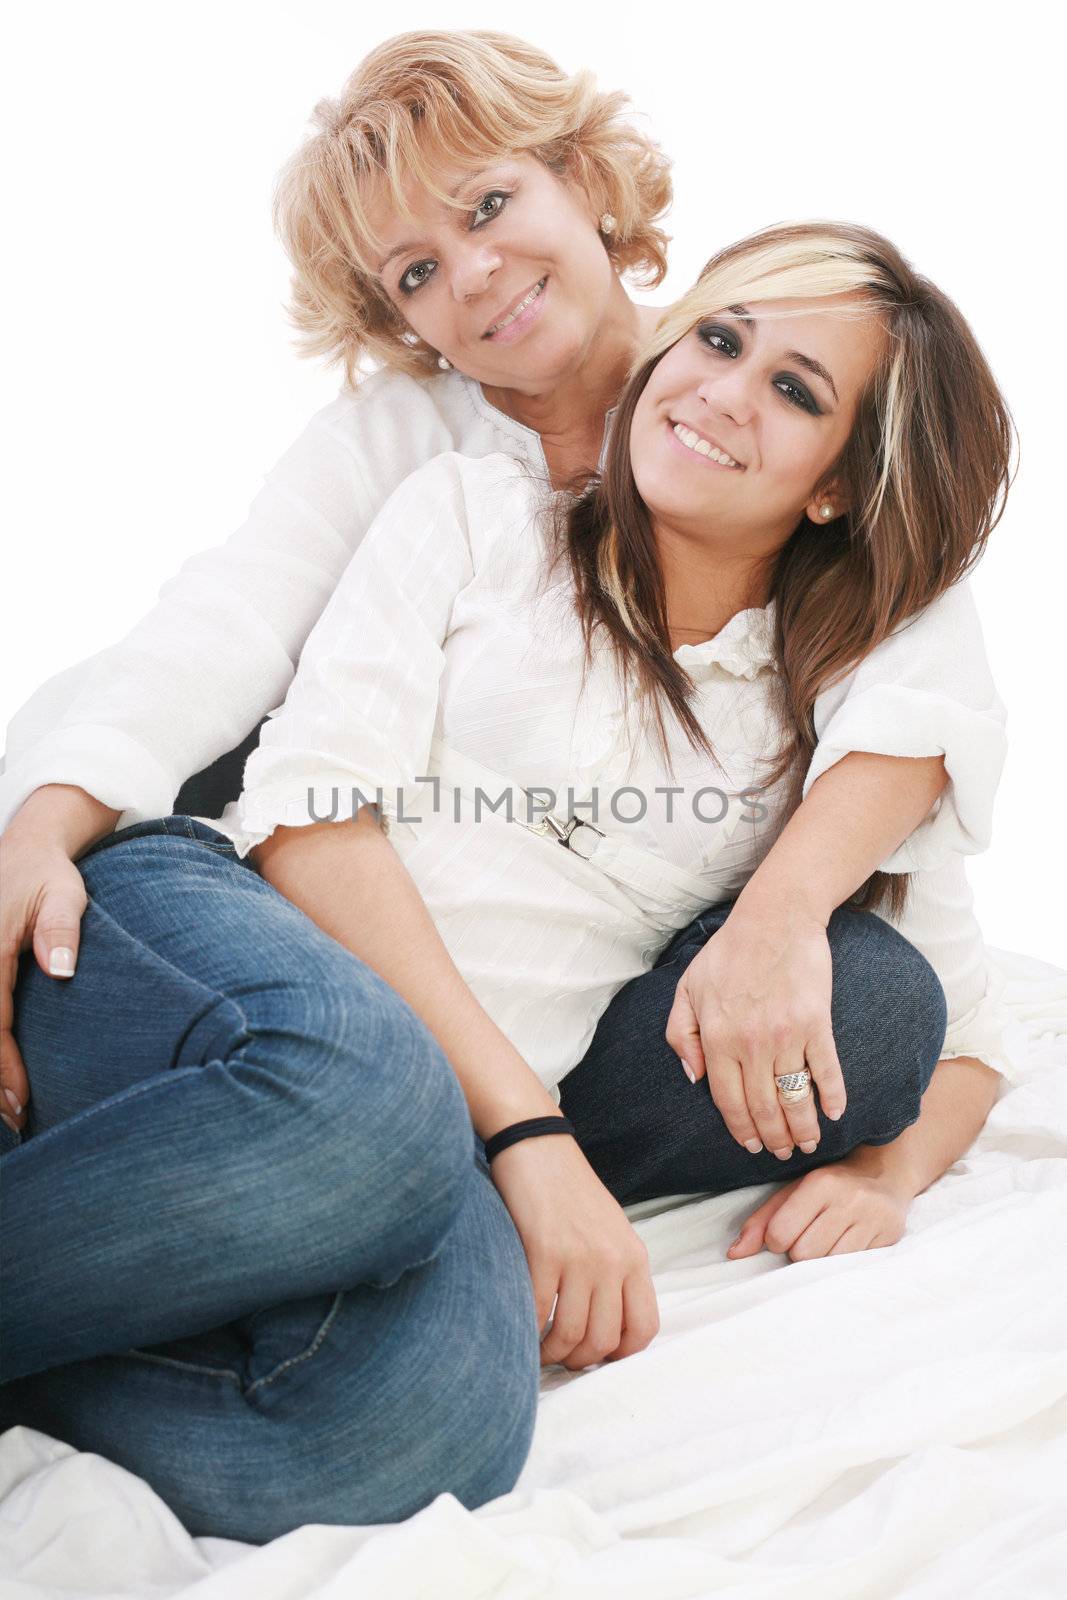 image of a mother and daughter happily together sitting on the floor